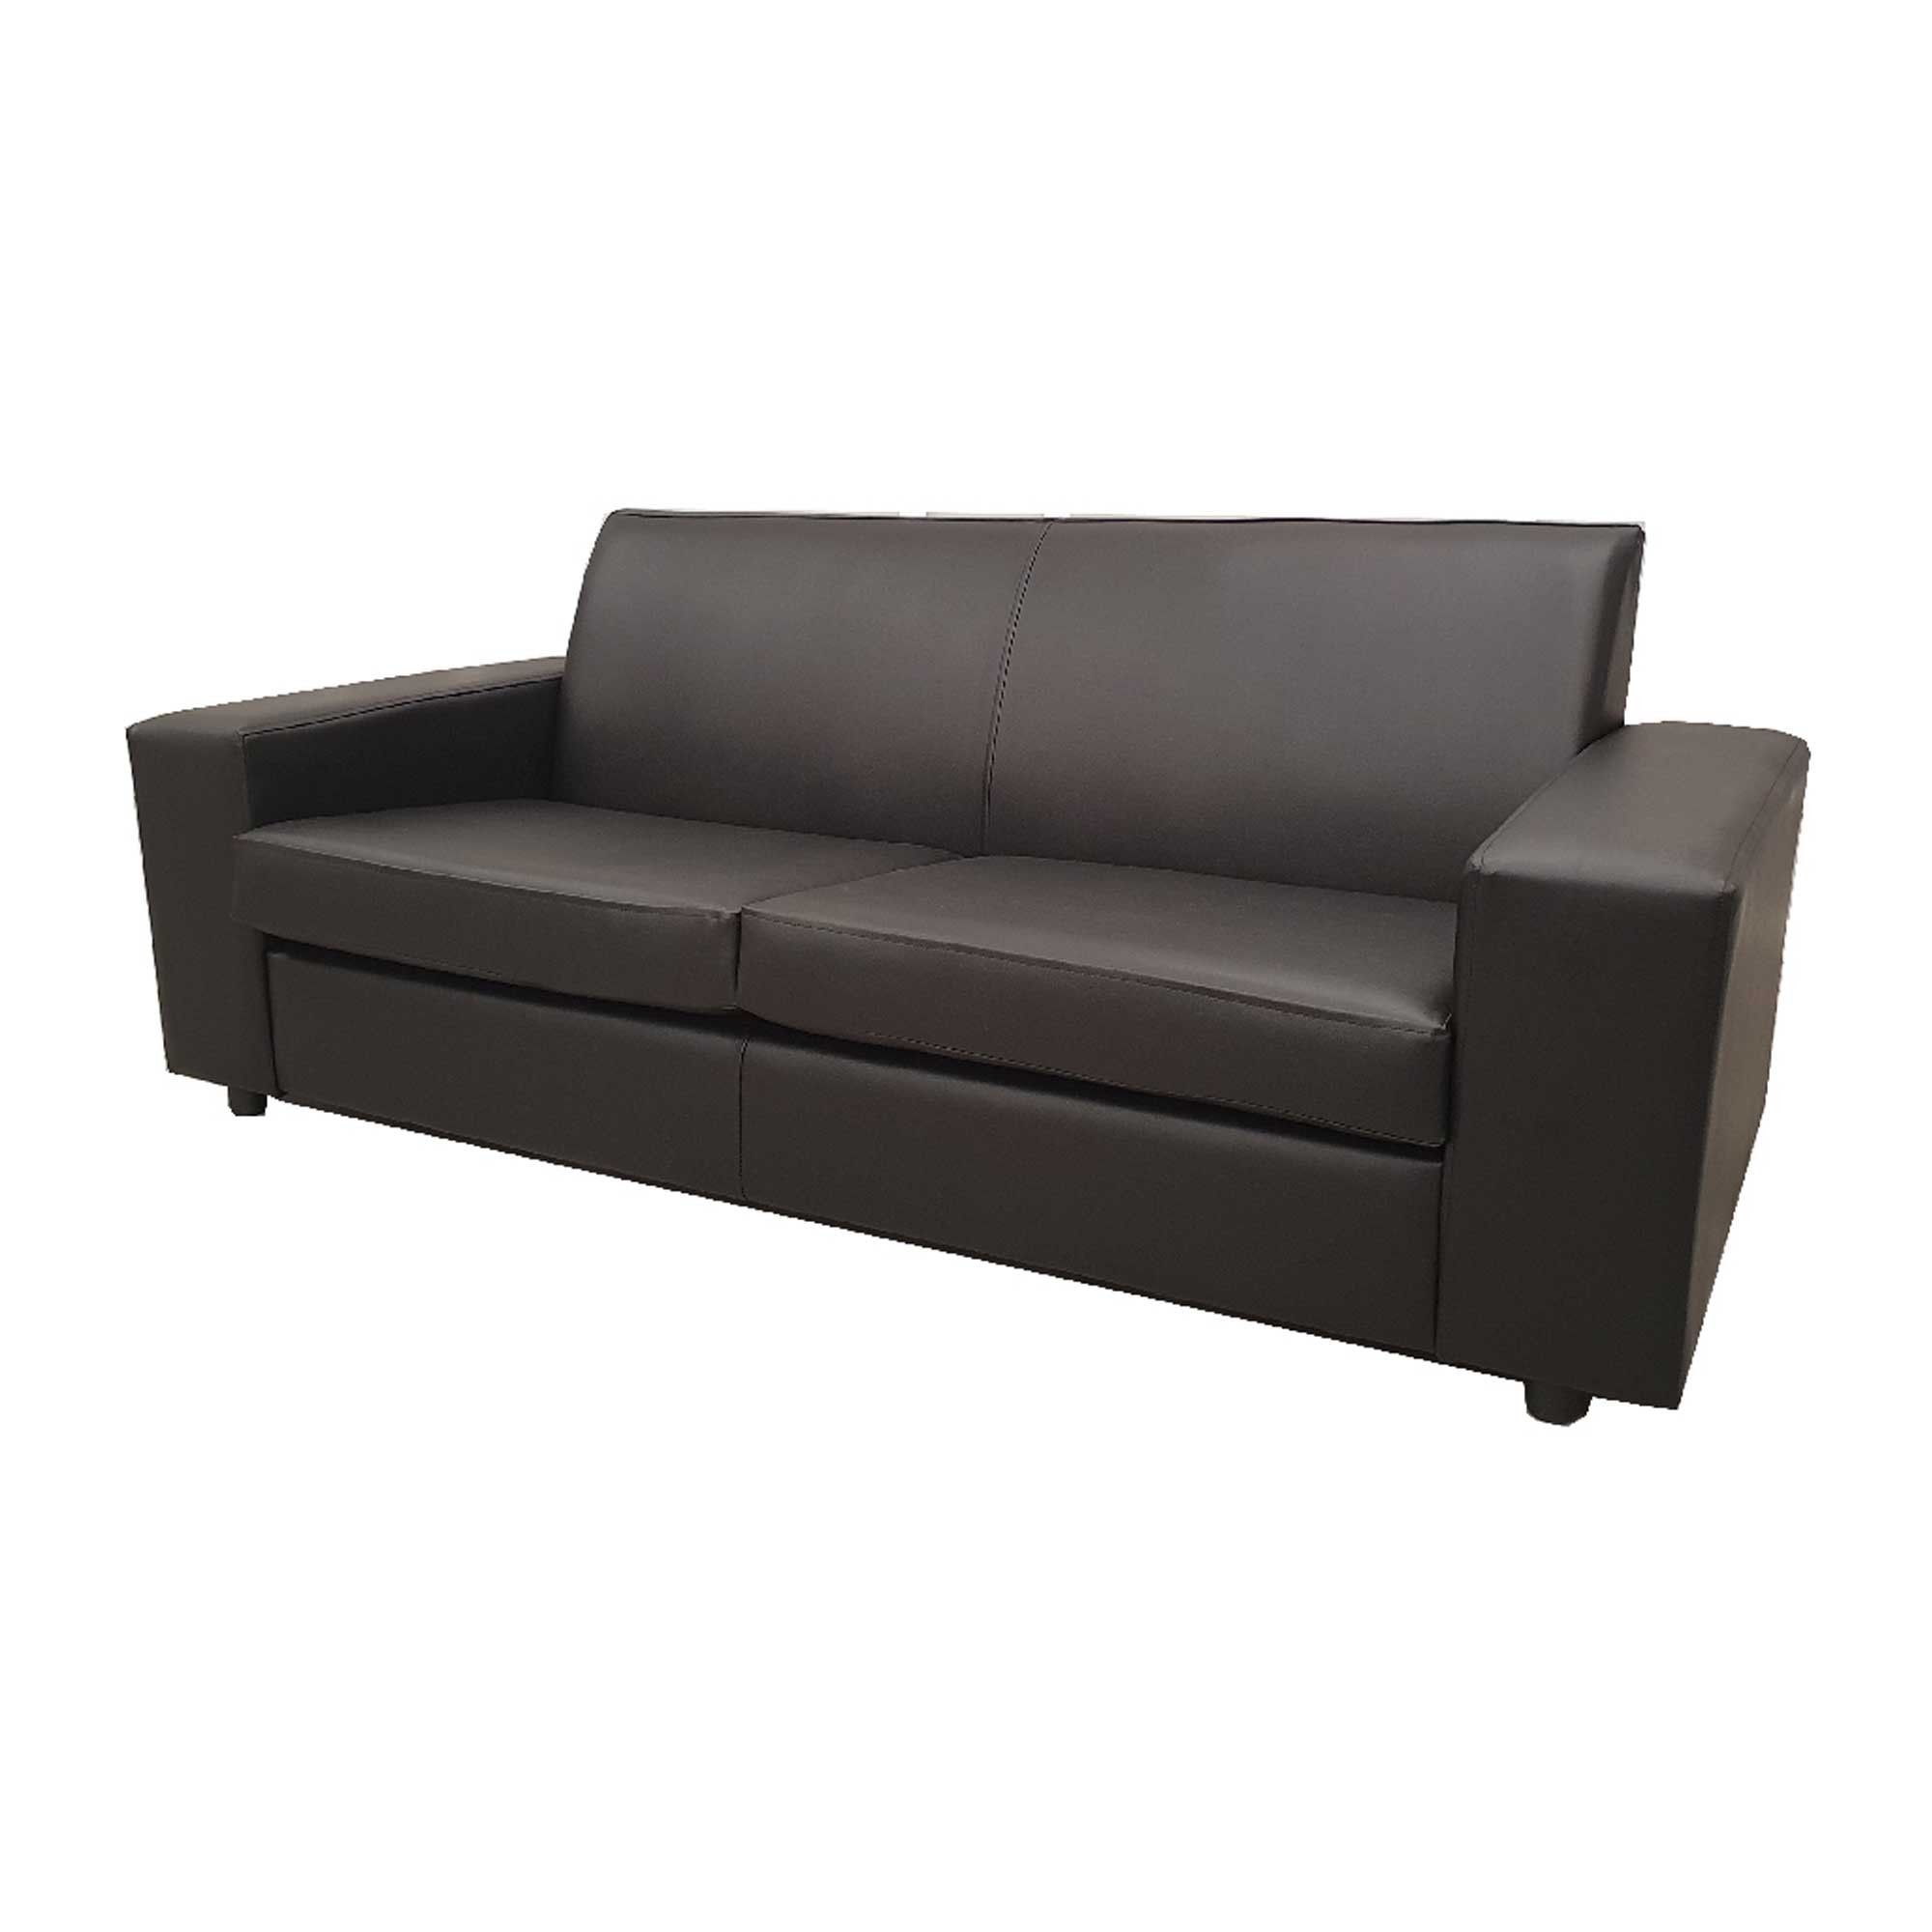 Nevada 3 Seater Black Faux Leather Contract Sofa | Black Sofa Inside Traditional 3 Seater Faux Leather Sofas (Gallery 16 of 20)